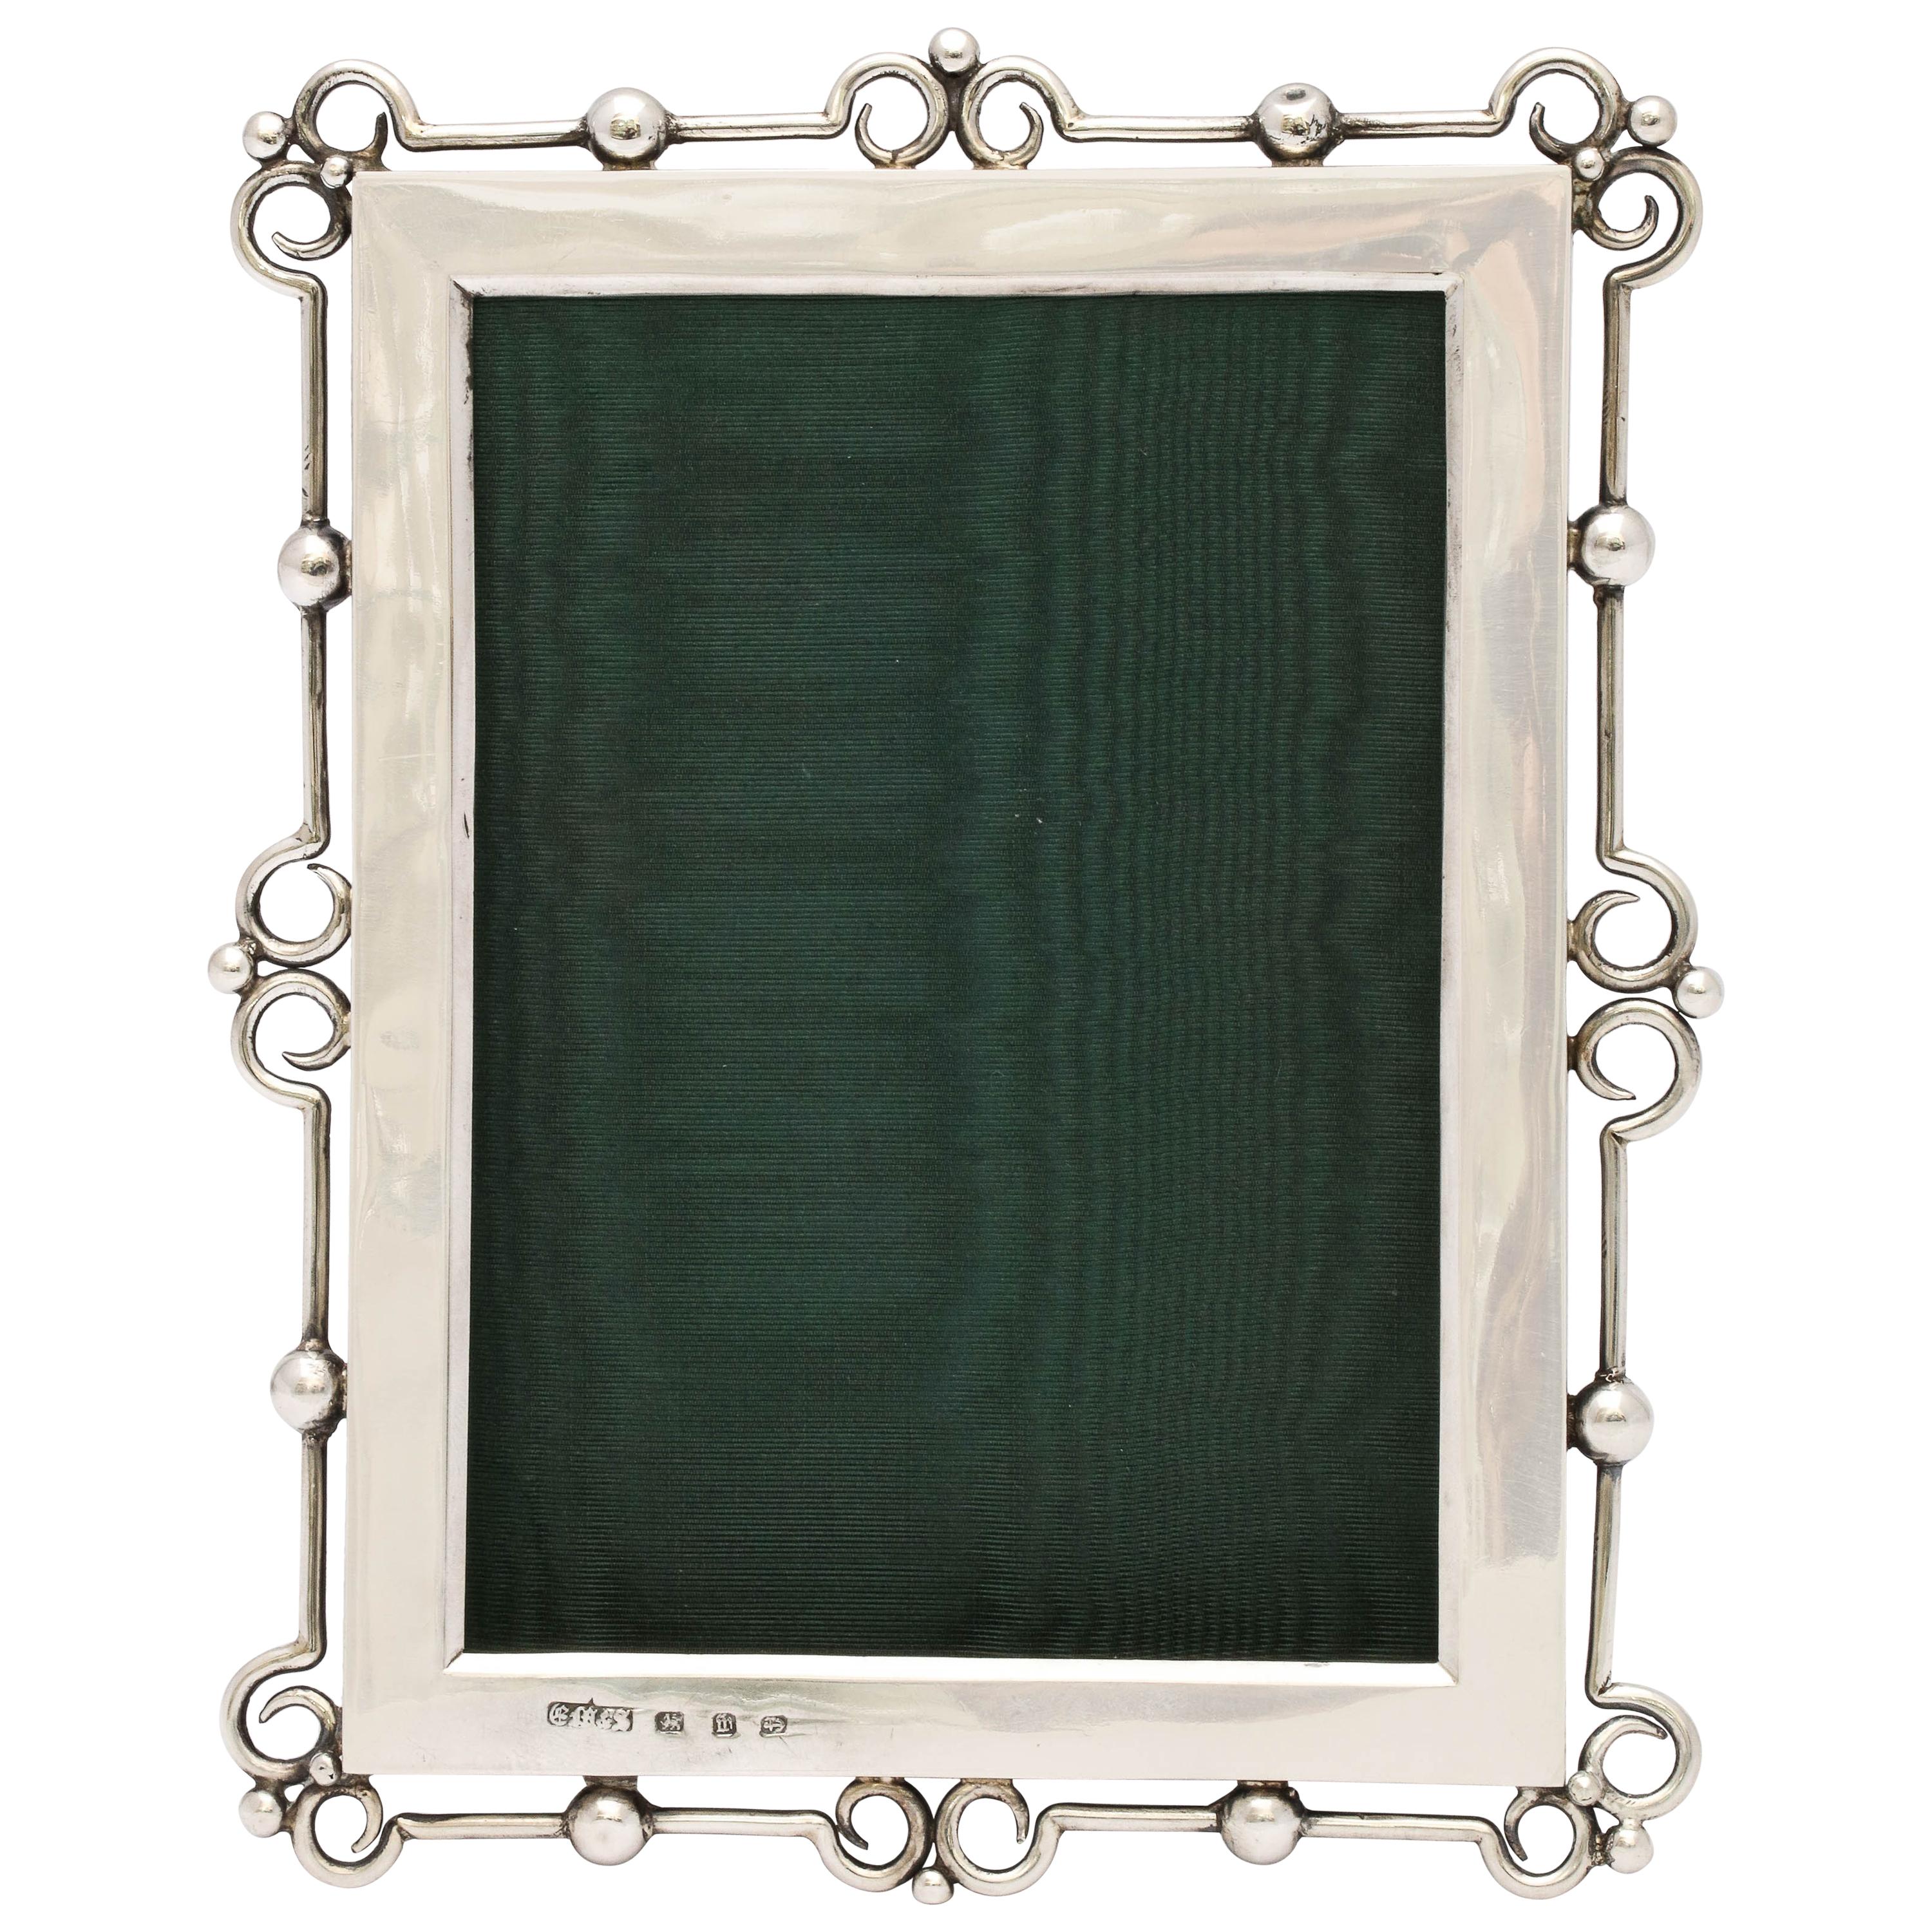 Unusual Arts & Crafts Sterling Silver Picture Frame, by E. Mander and Sons